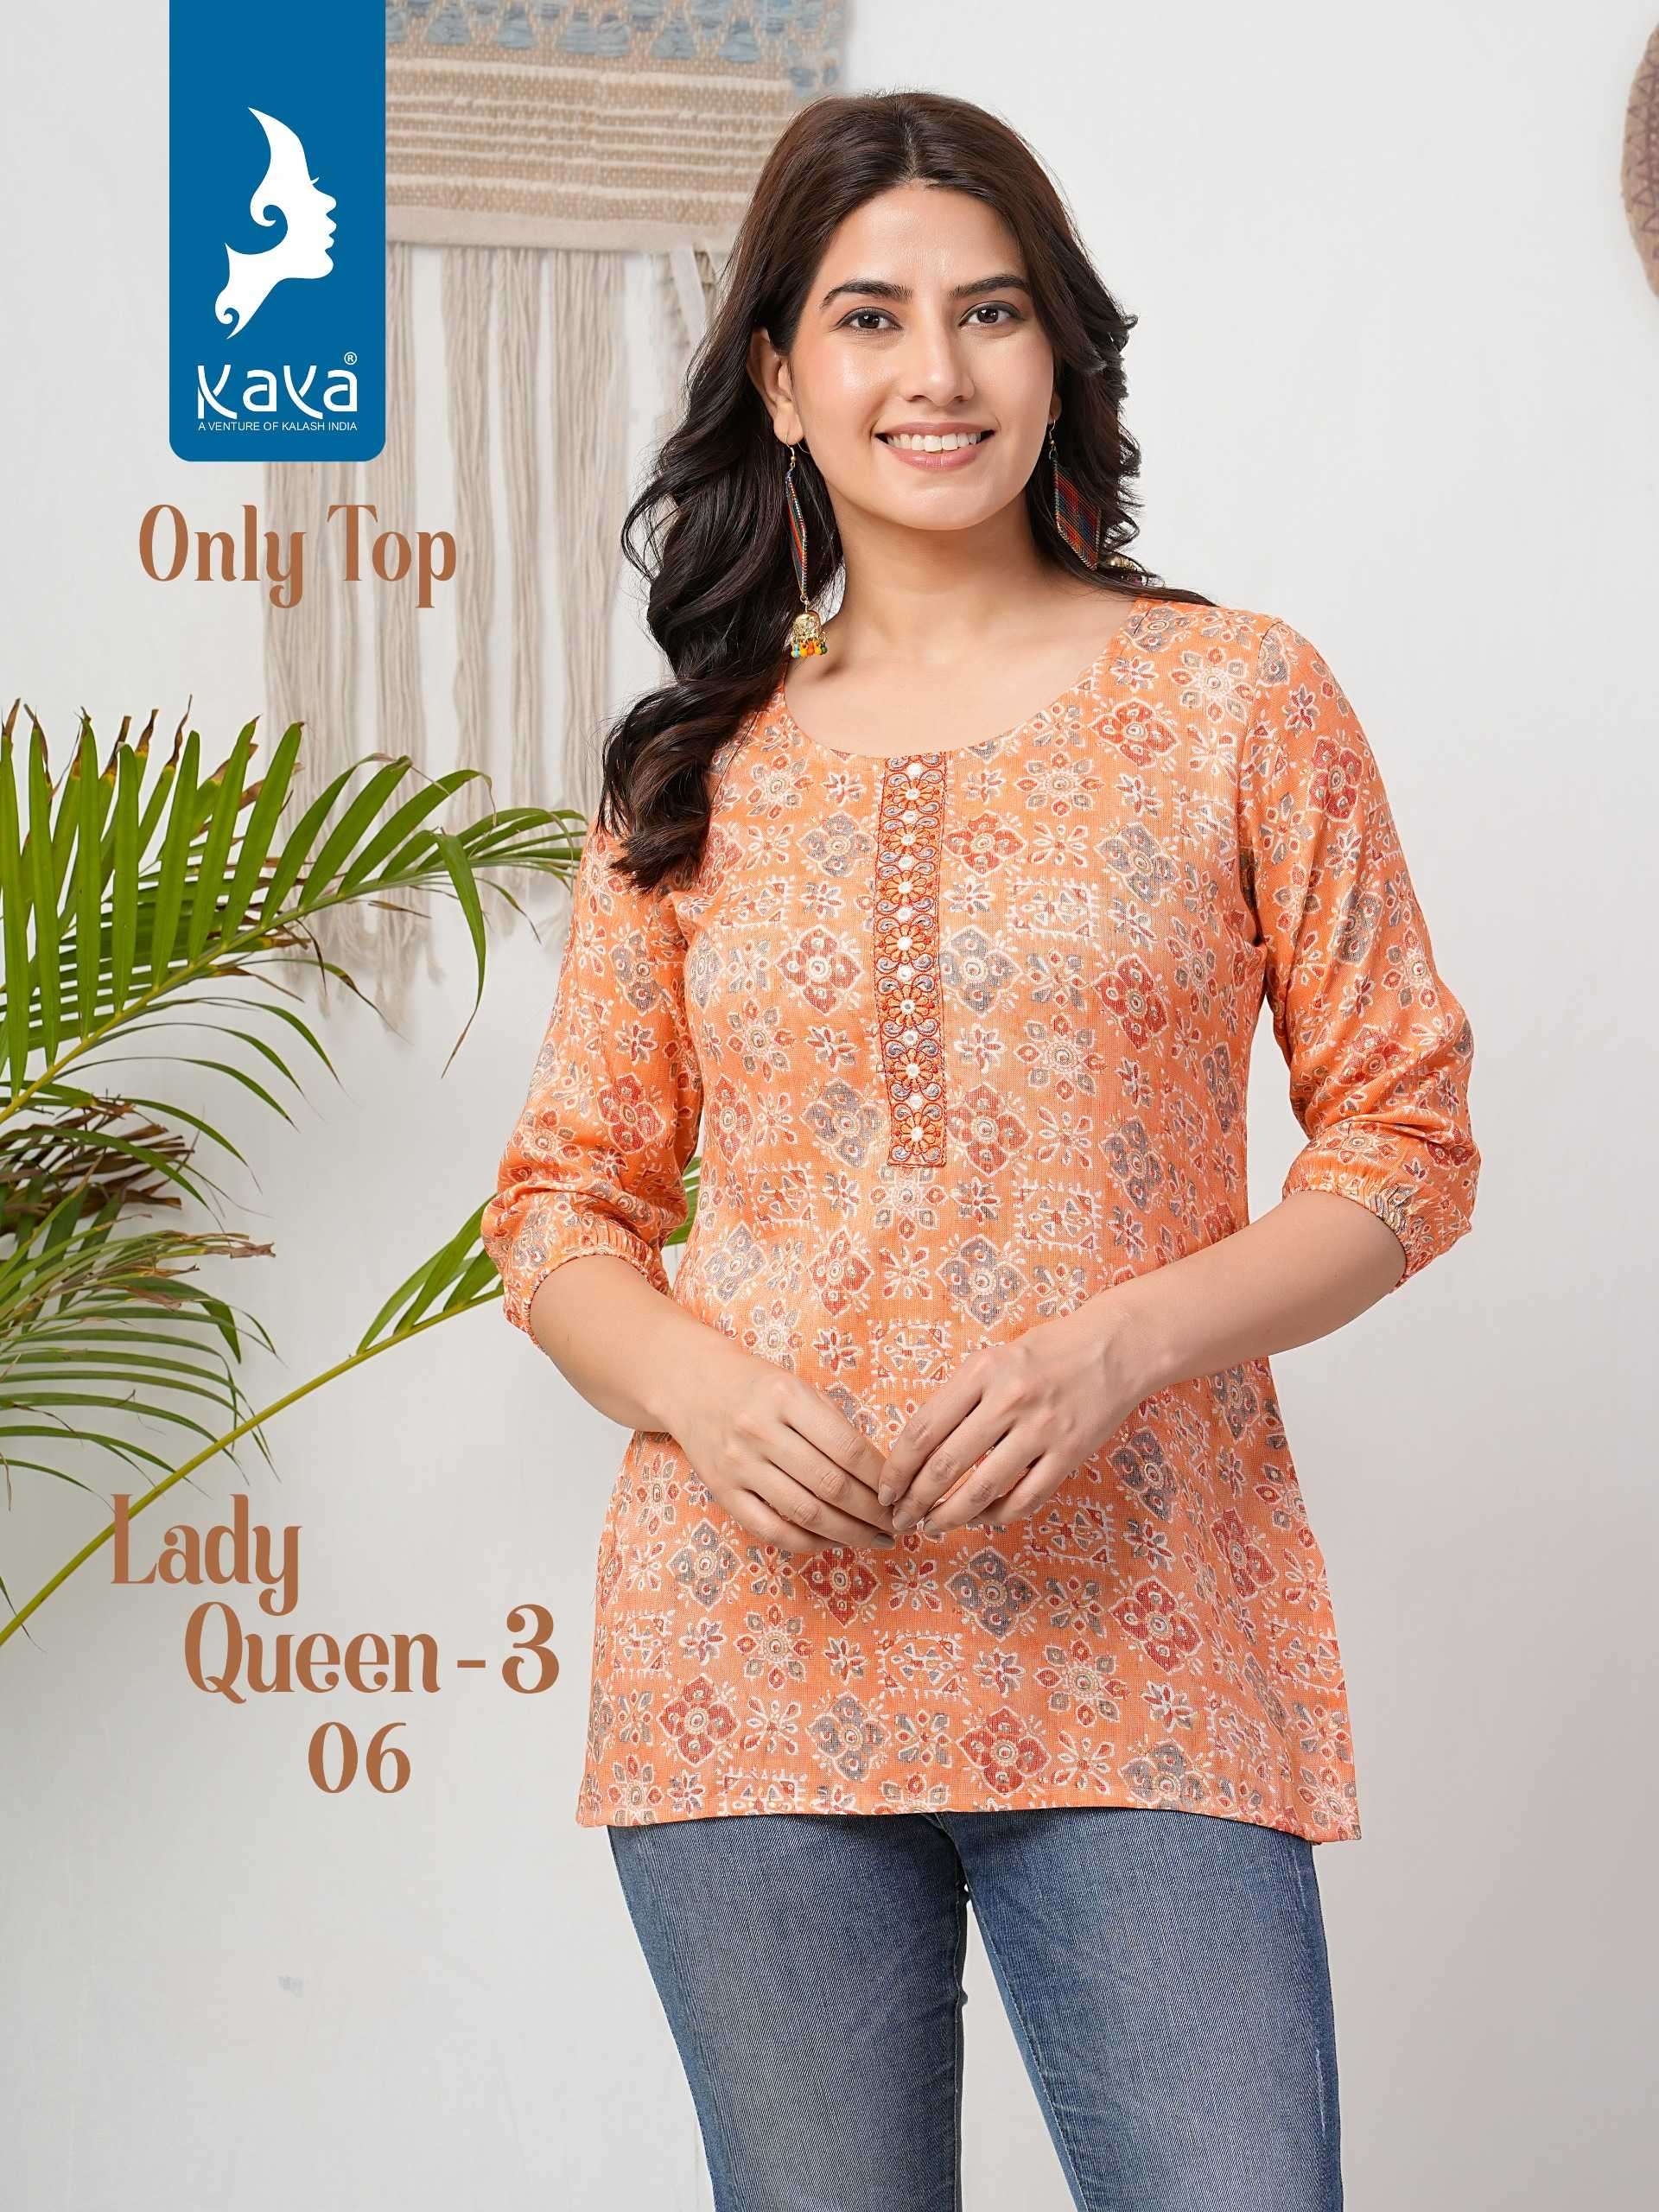 LADY QUEEN VOL-3 SERIES 01 TO 08 BY KAYA DESIGNER PRINTED CAPSUL SHORT TOPS ARE AVAILABLE AT WHOLESALE PRICE